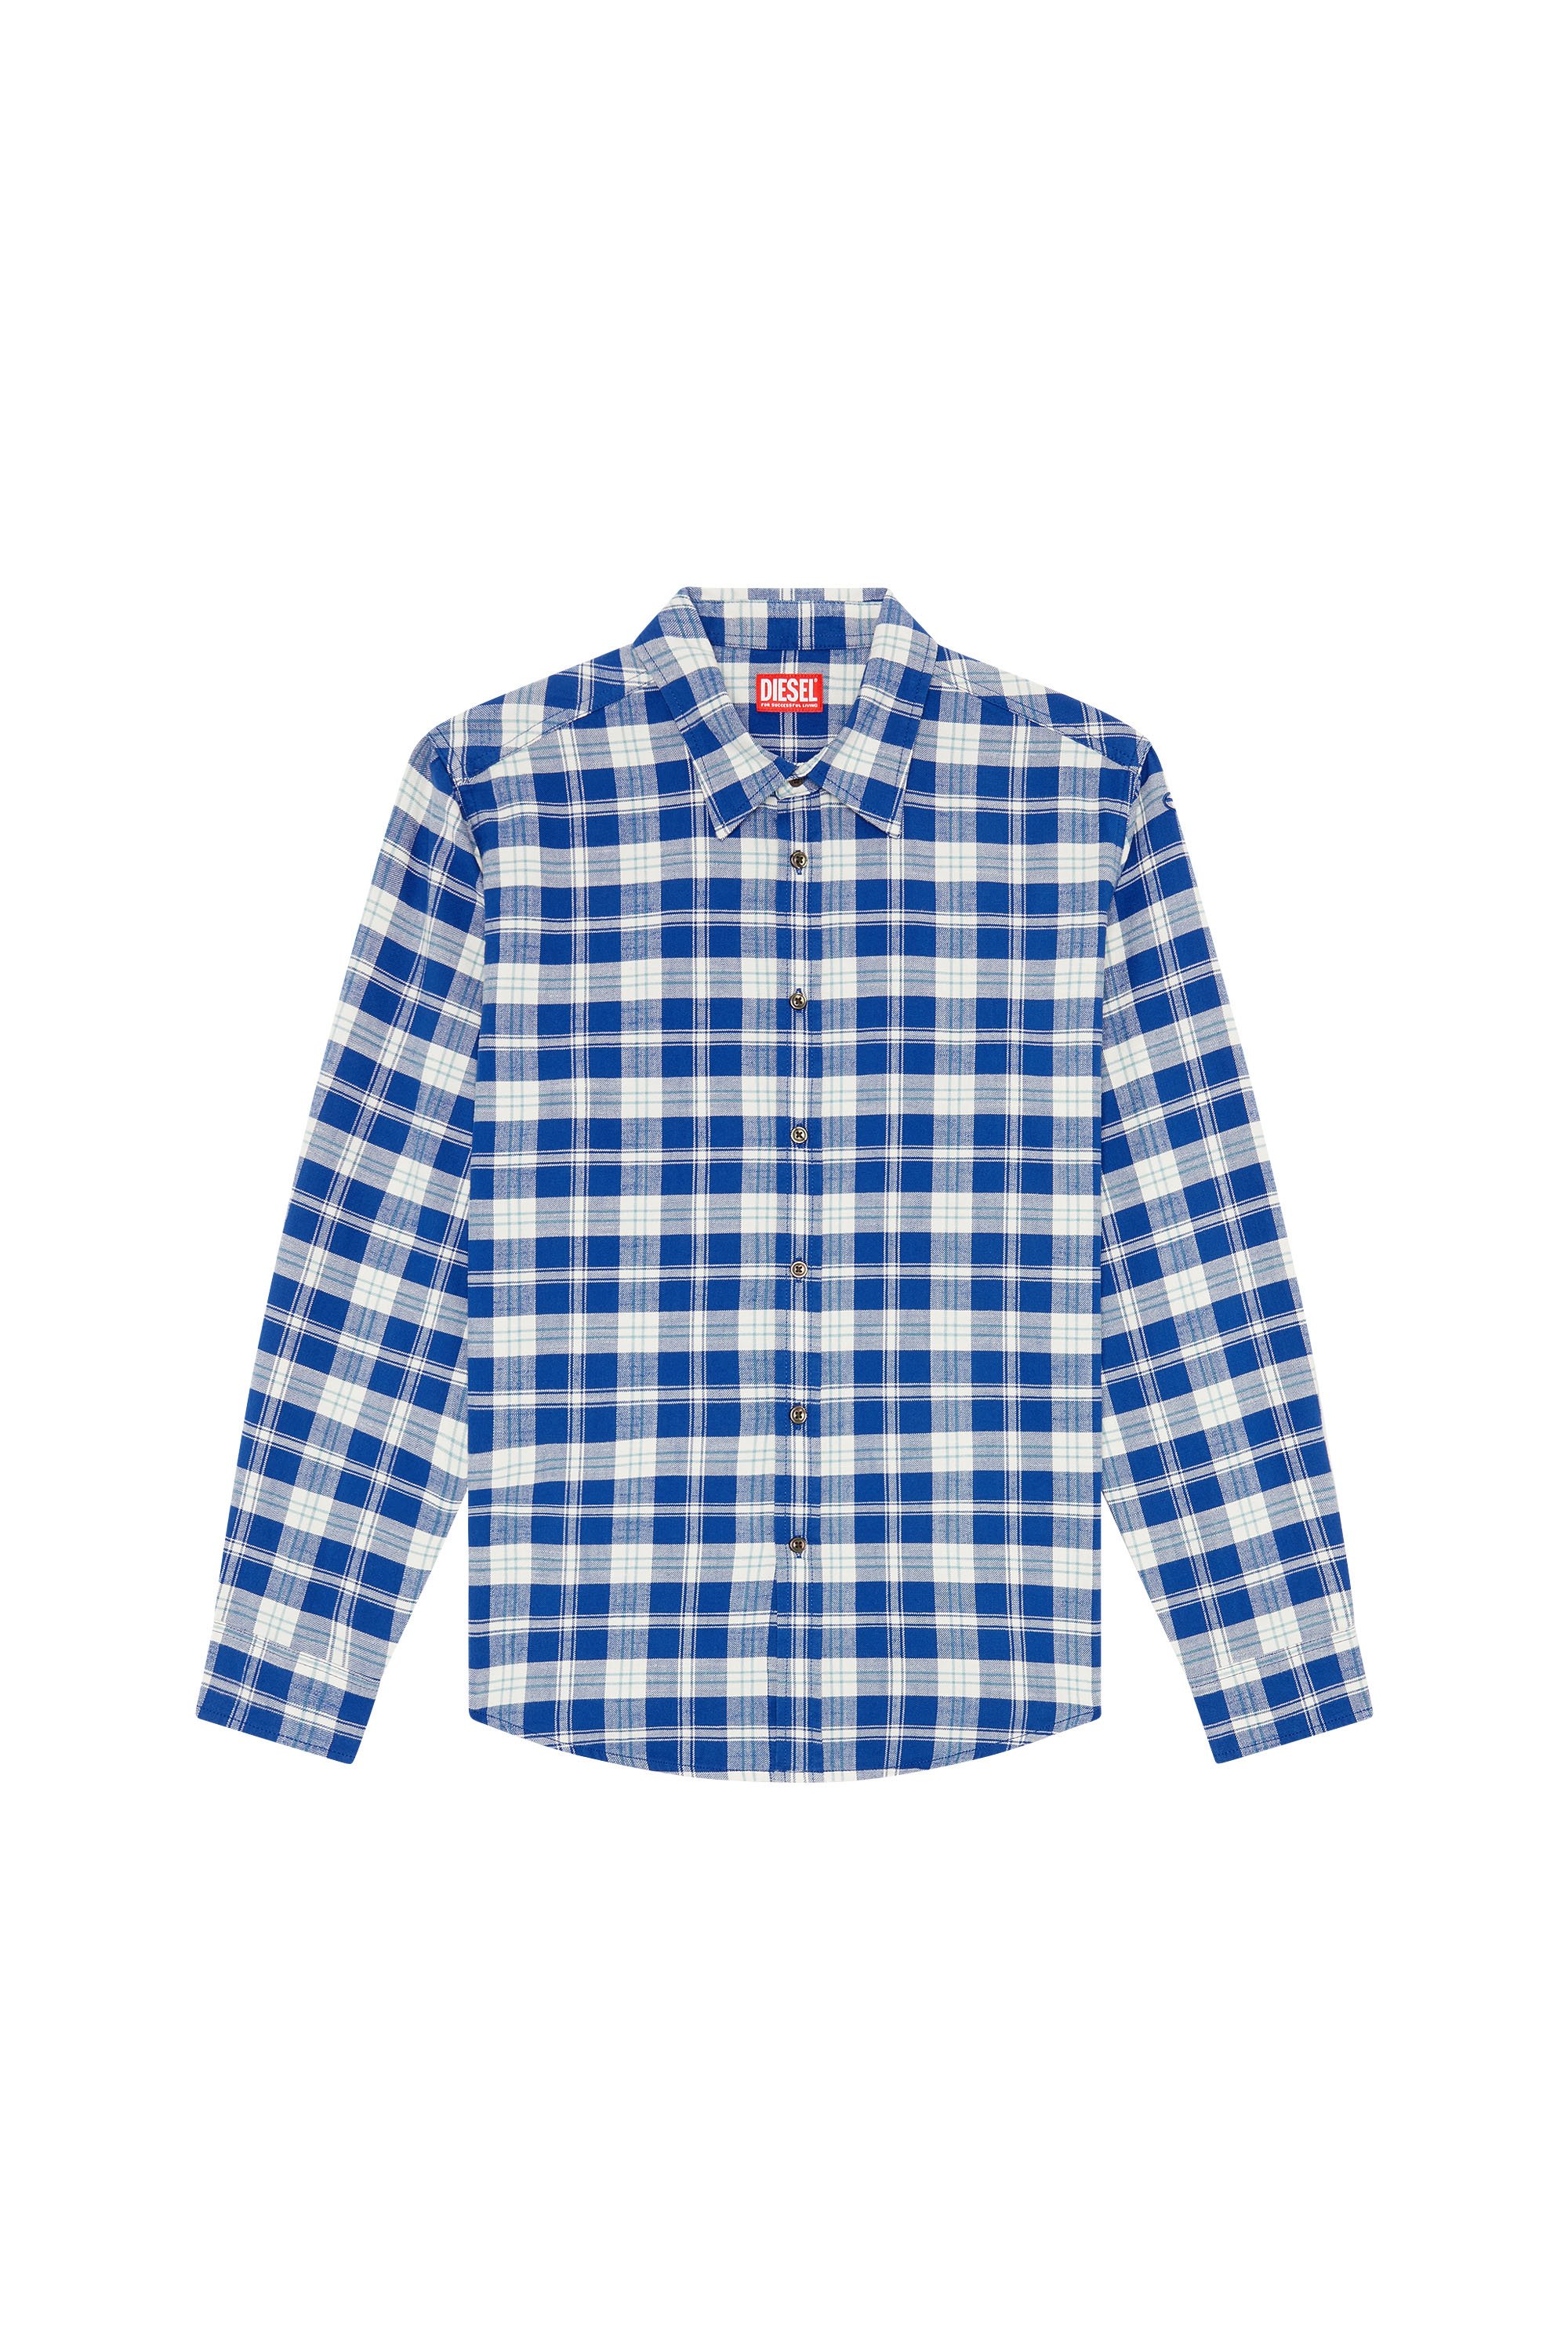 Diesel - S-UMBE-CHECK-NW, Man Shirt in checked flannel in Multicolor - Image 3